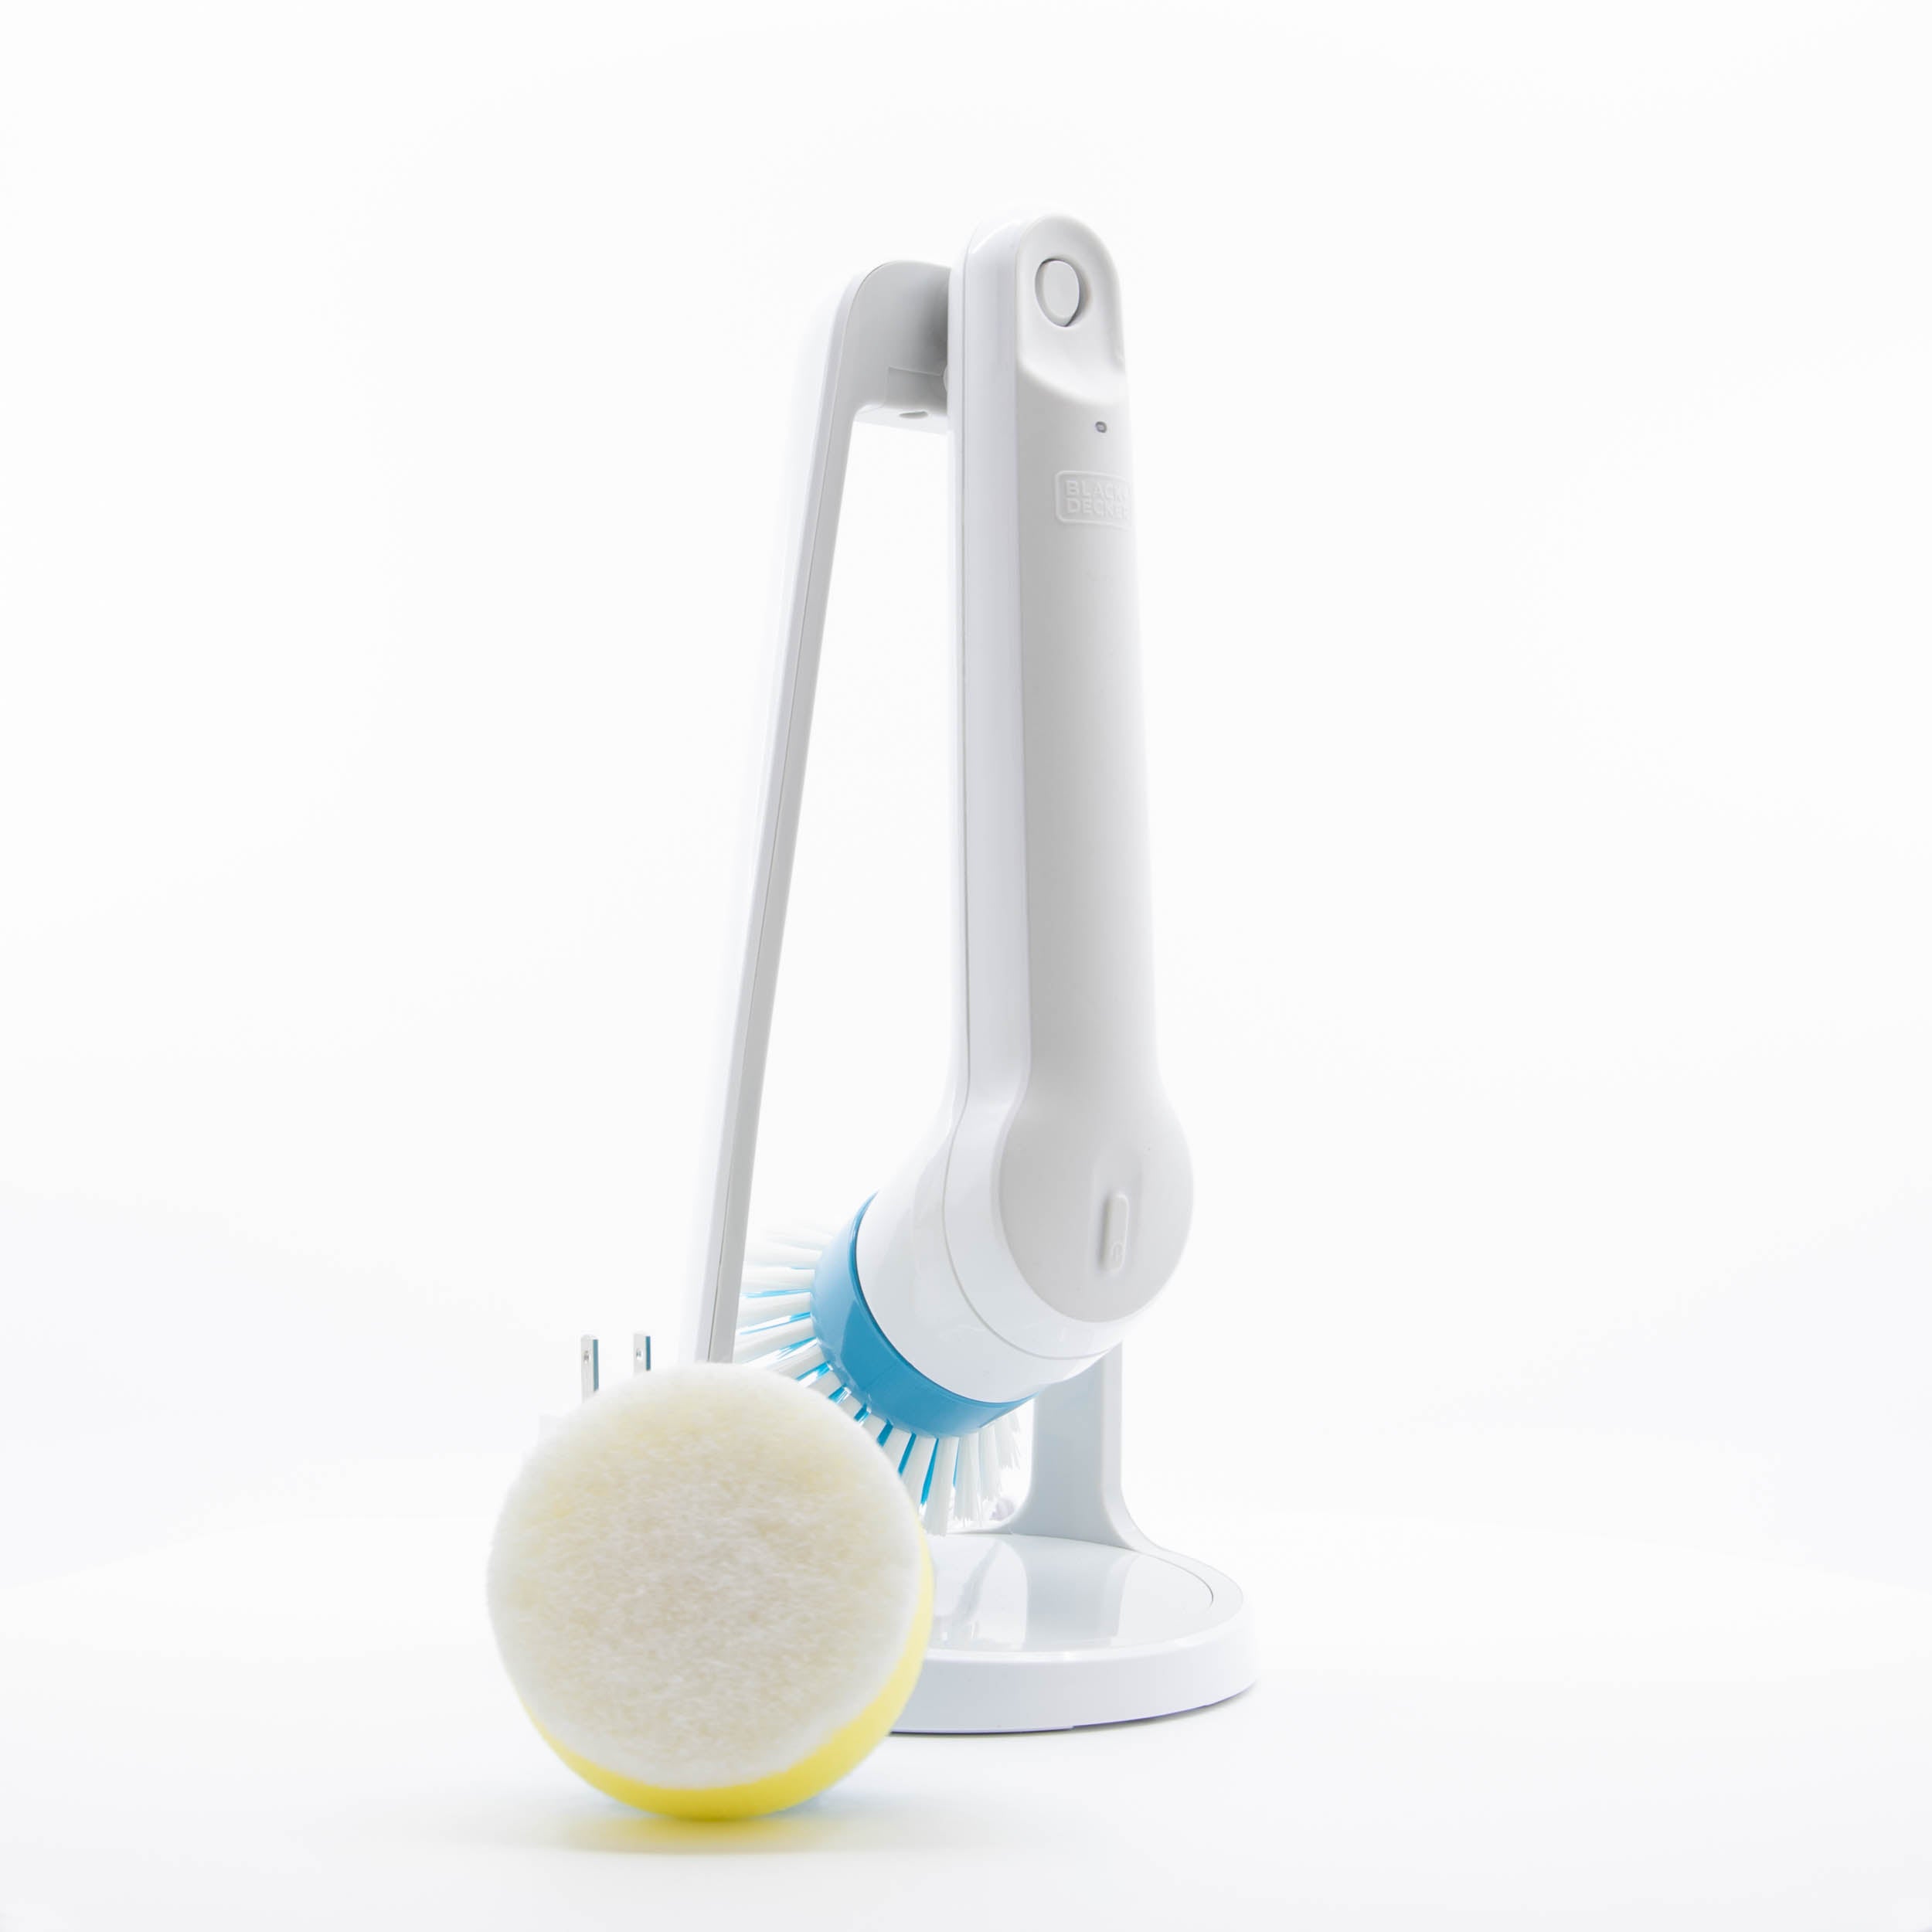 Grimebuster Pro Power Scrubber Brush, Rechargeable